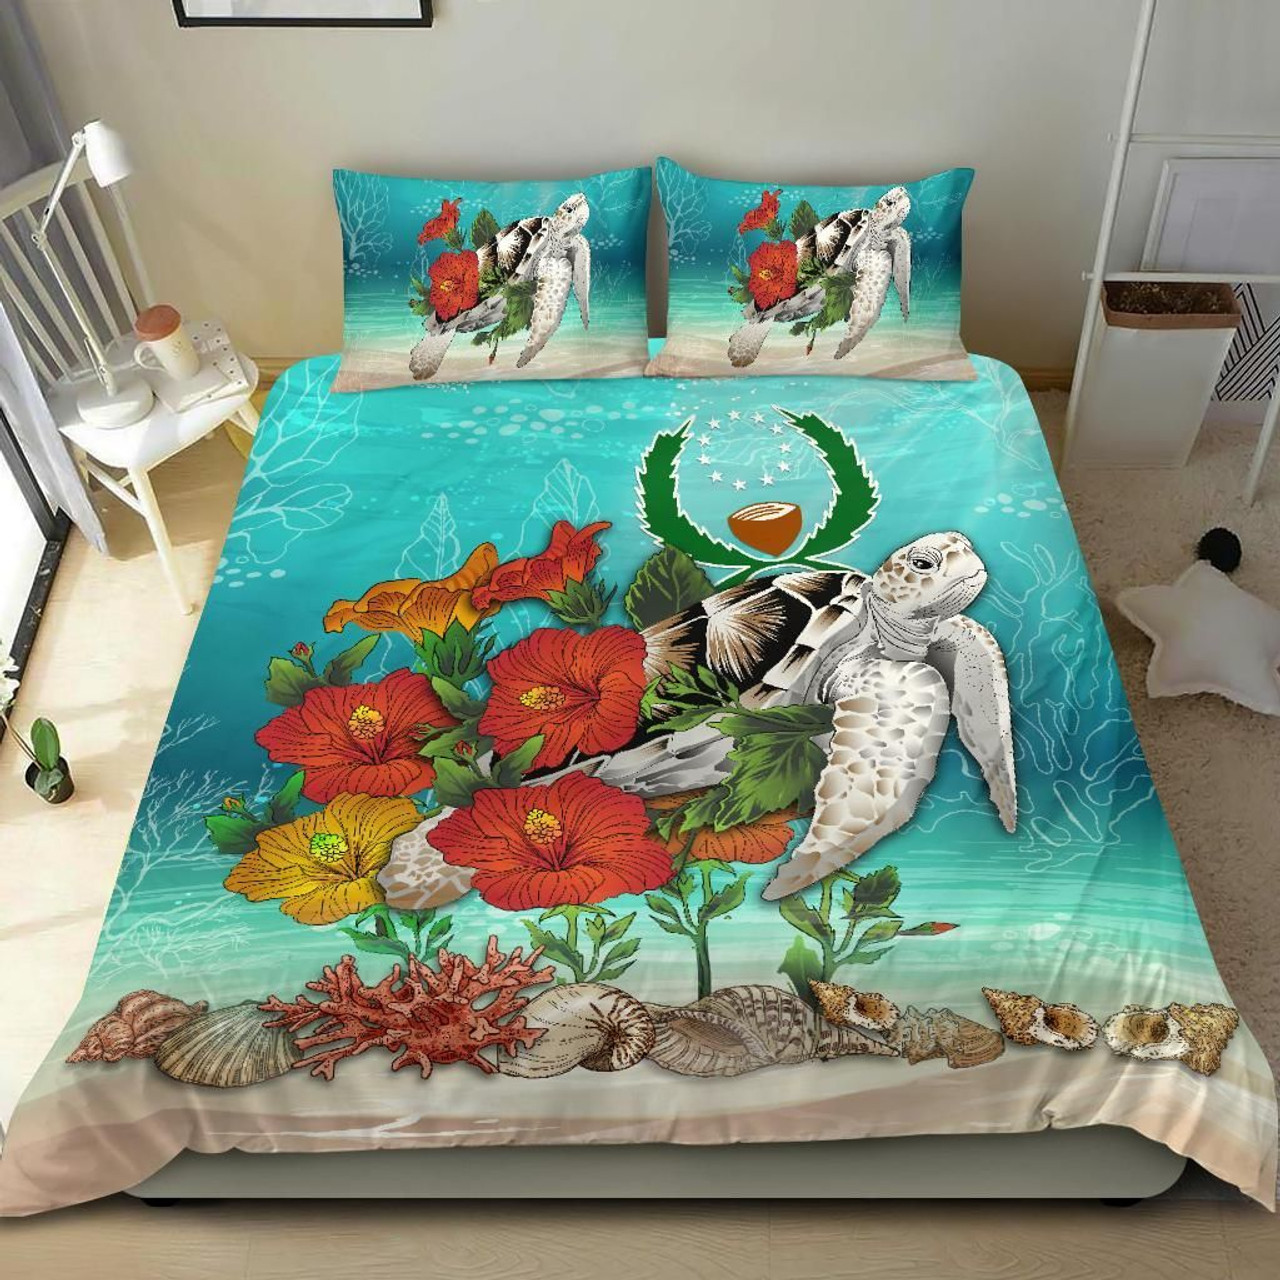 Northern Mariana Islands Personalised Bedding Set - Hibiscus And Banana Leaves 4